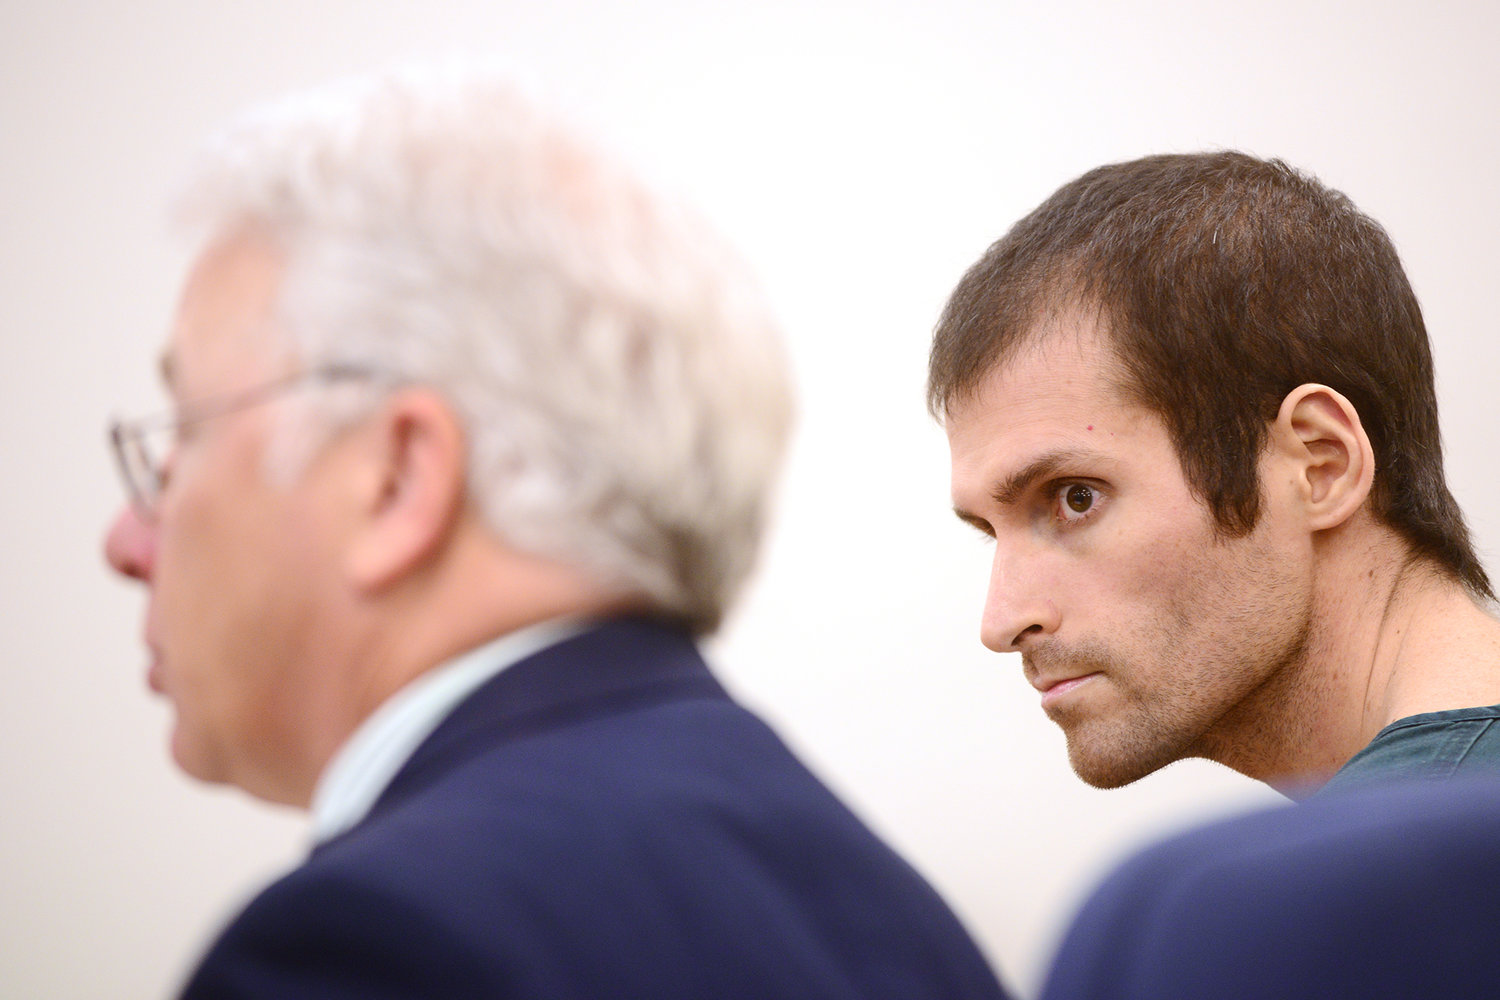 Ryon T. Connery, right, looks over at his defense attorney, David Arcuri during a sentencing hearing in Lewis County Superior Court on Wednesday afternoon at the Lewis County Law and Justice Center in Chehalis. Connery was sentenced to 16 months on two counts of third-degree assault of a child.